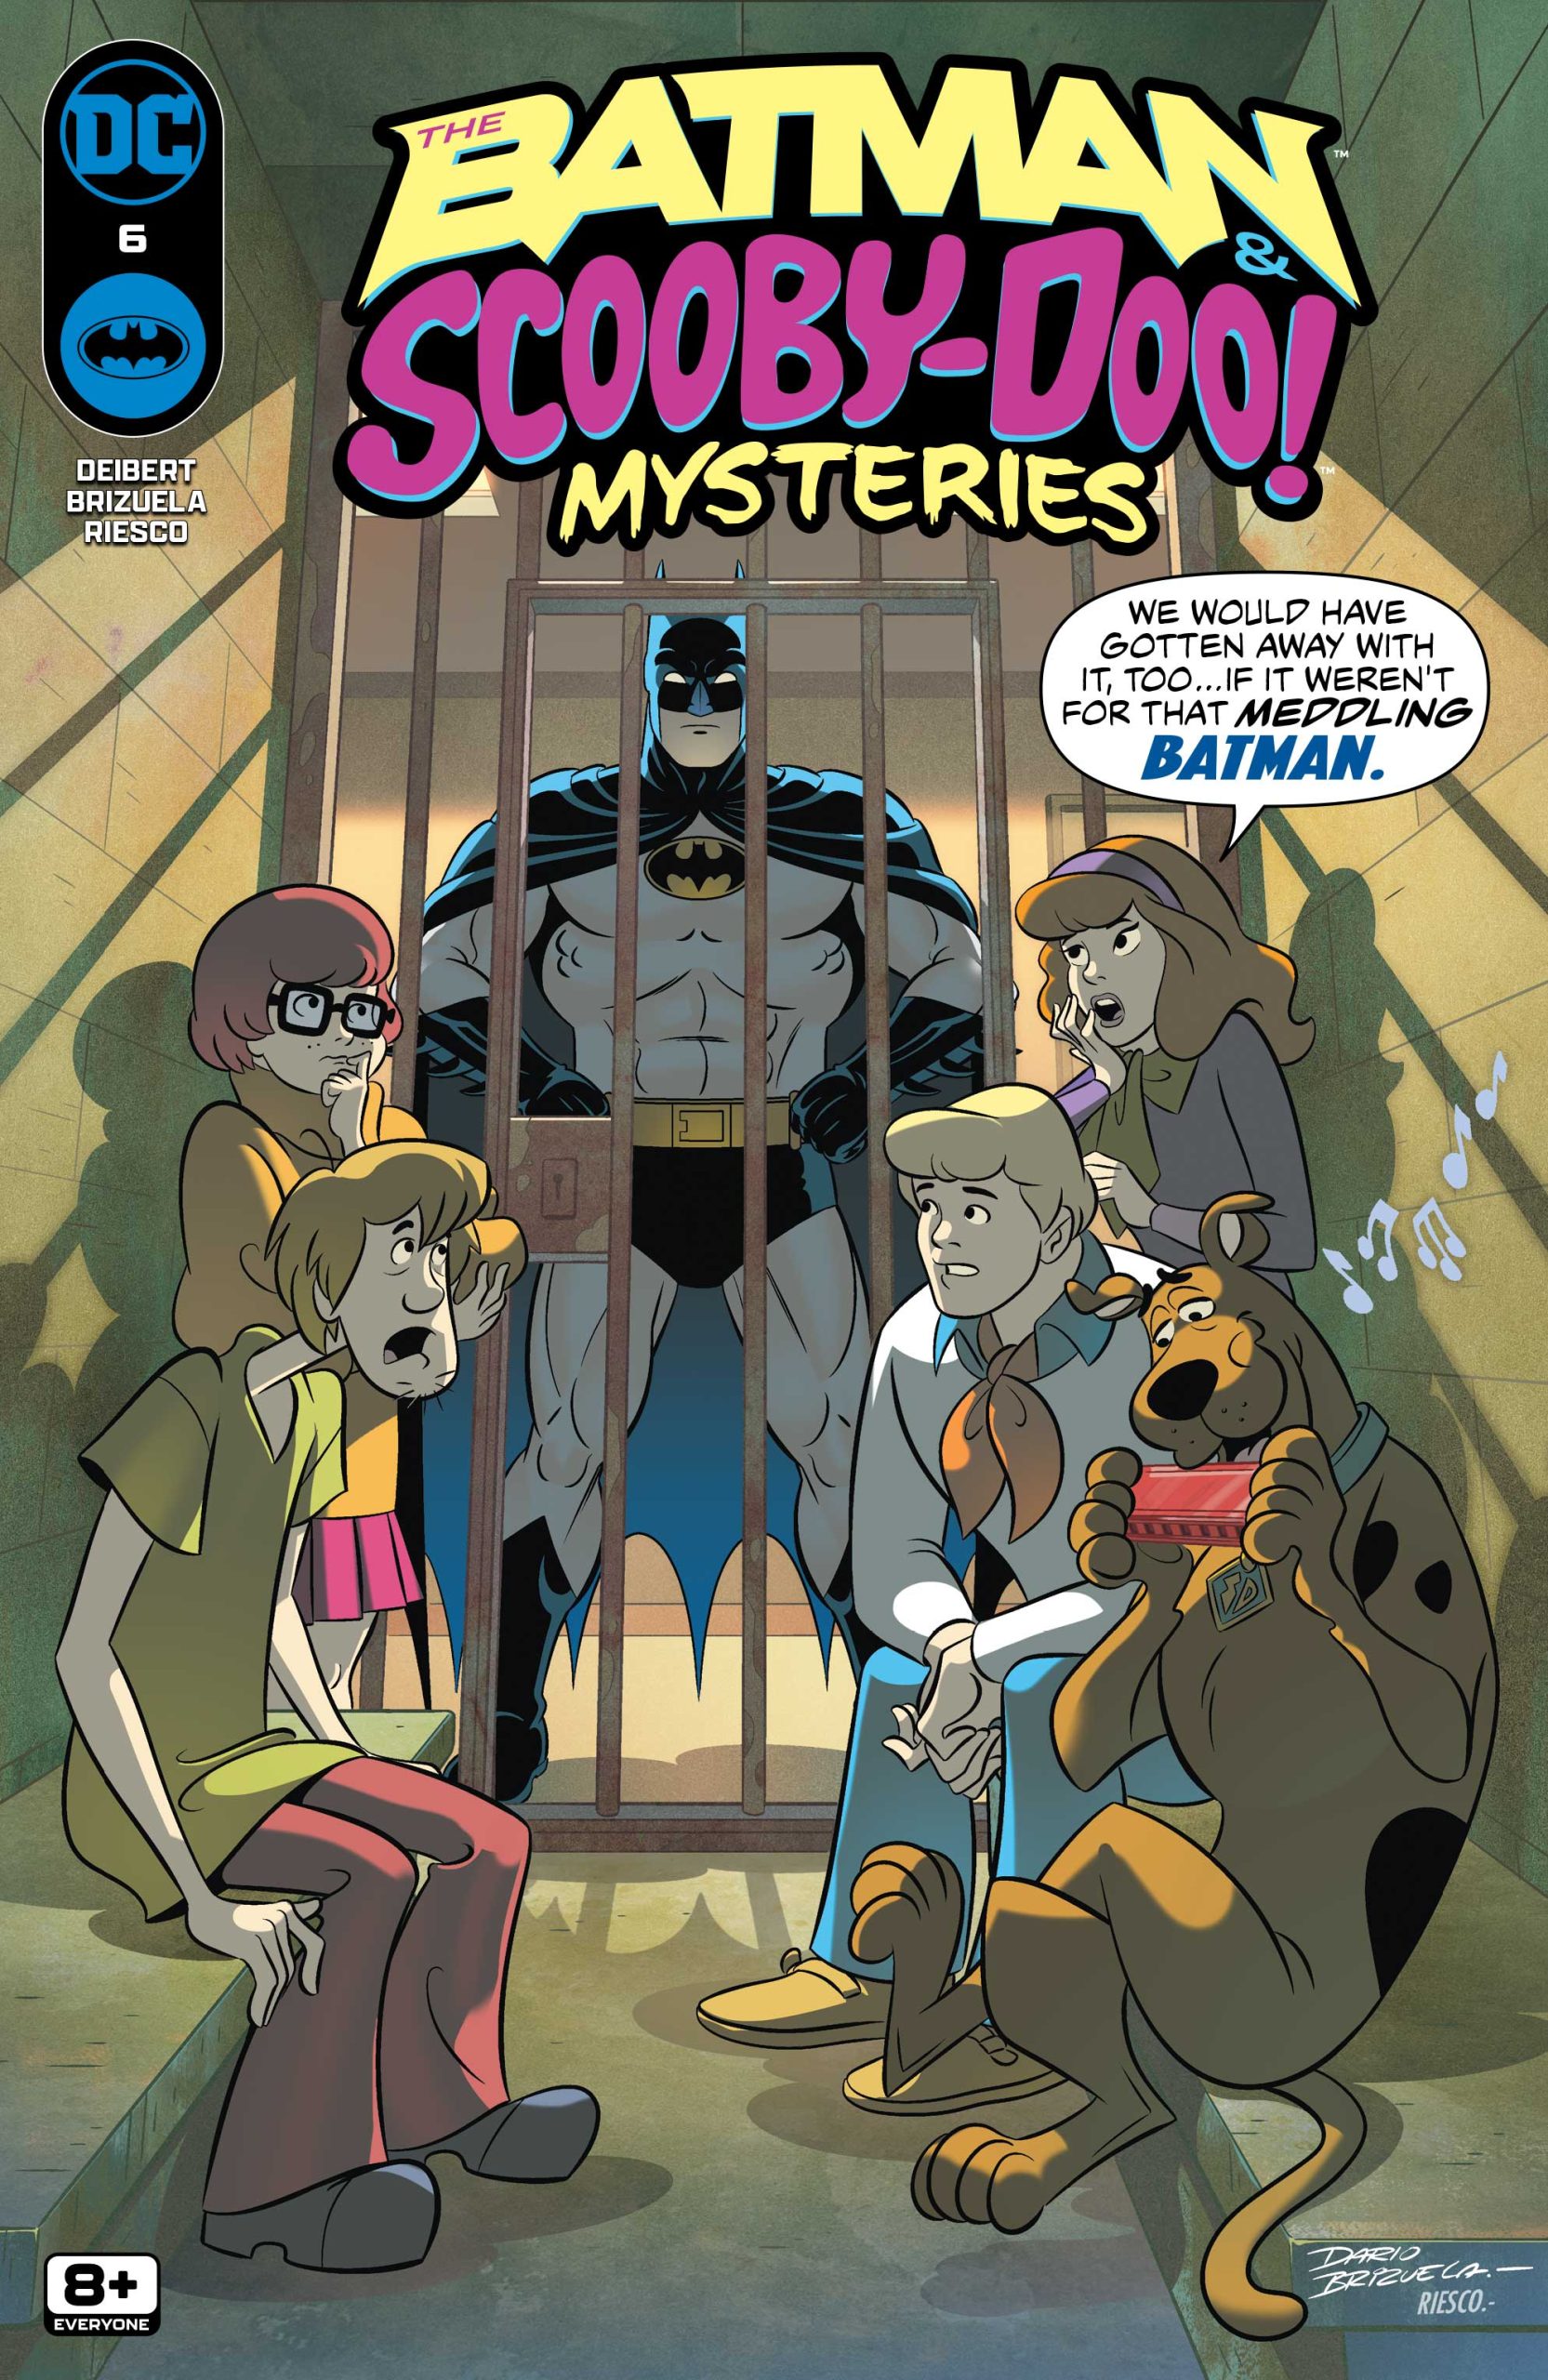 DC Preview: The Batman & Scooby-Doo Mysteries #6